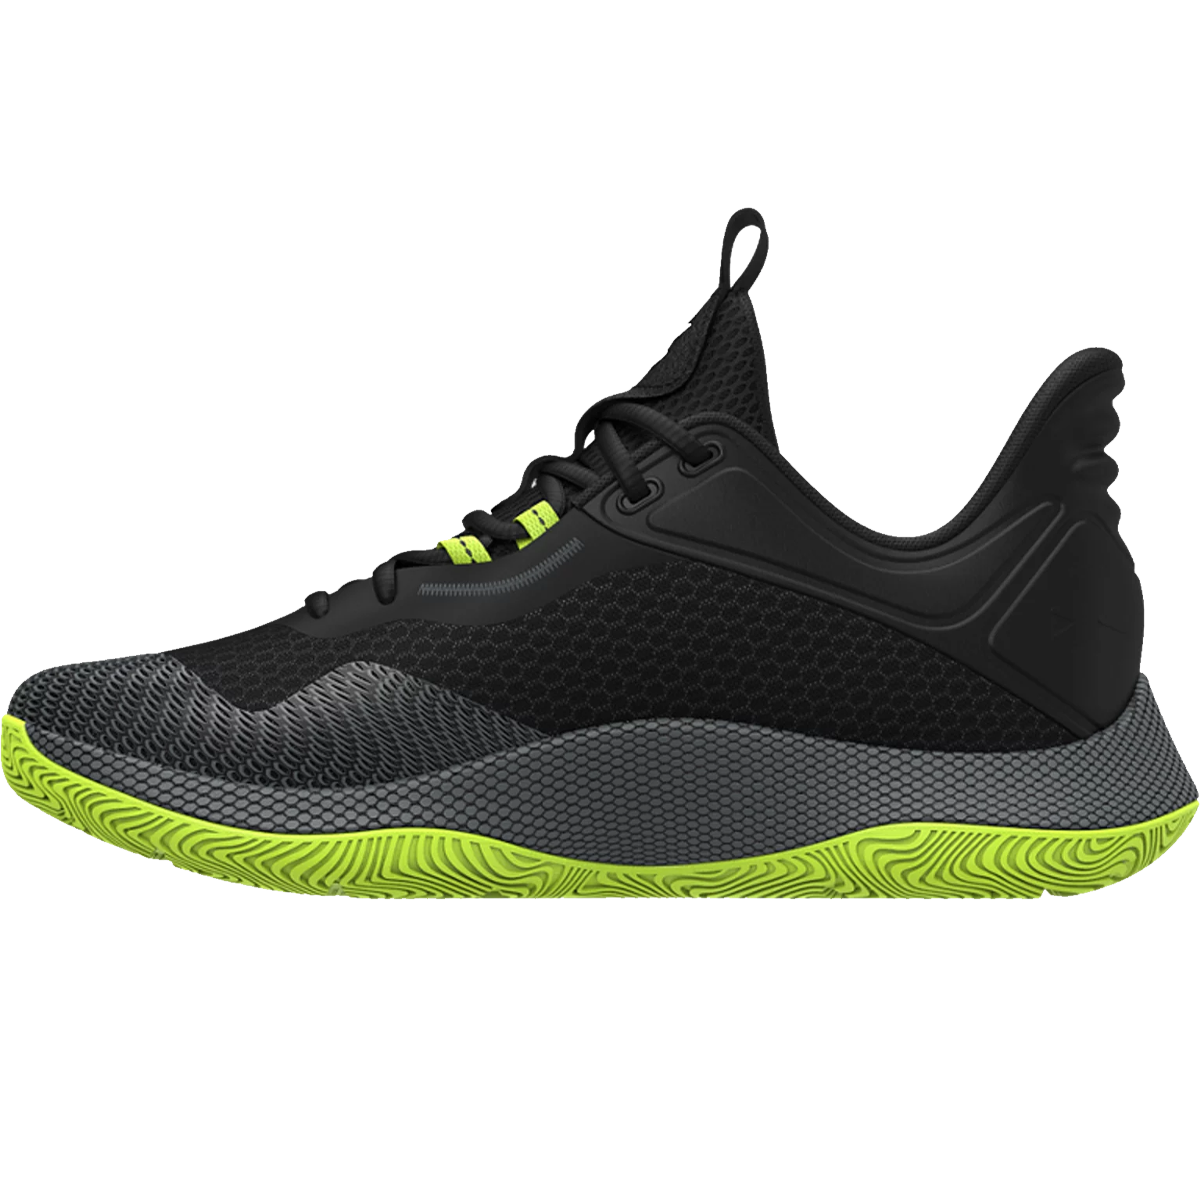 Under Armour Curry Hovr Splash 2 Basketball Shoes in Yellow for Men